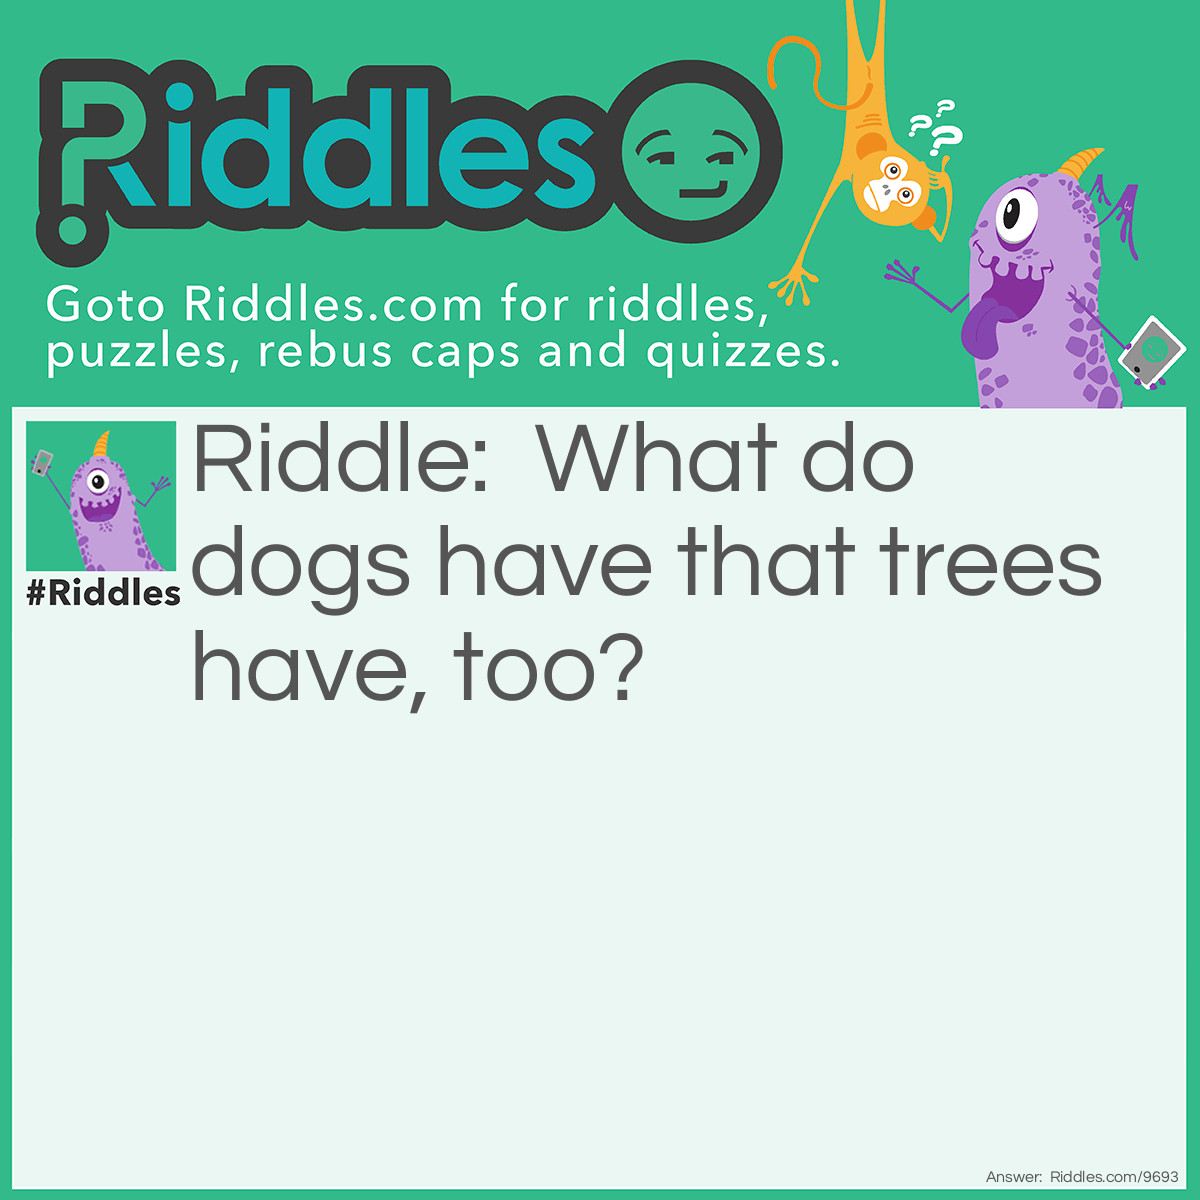 Riddle: What do dogs have that trees have, too? Answer: Bark